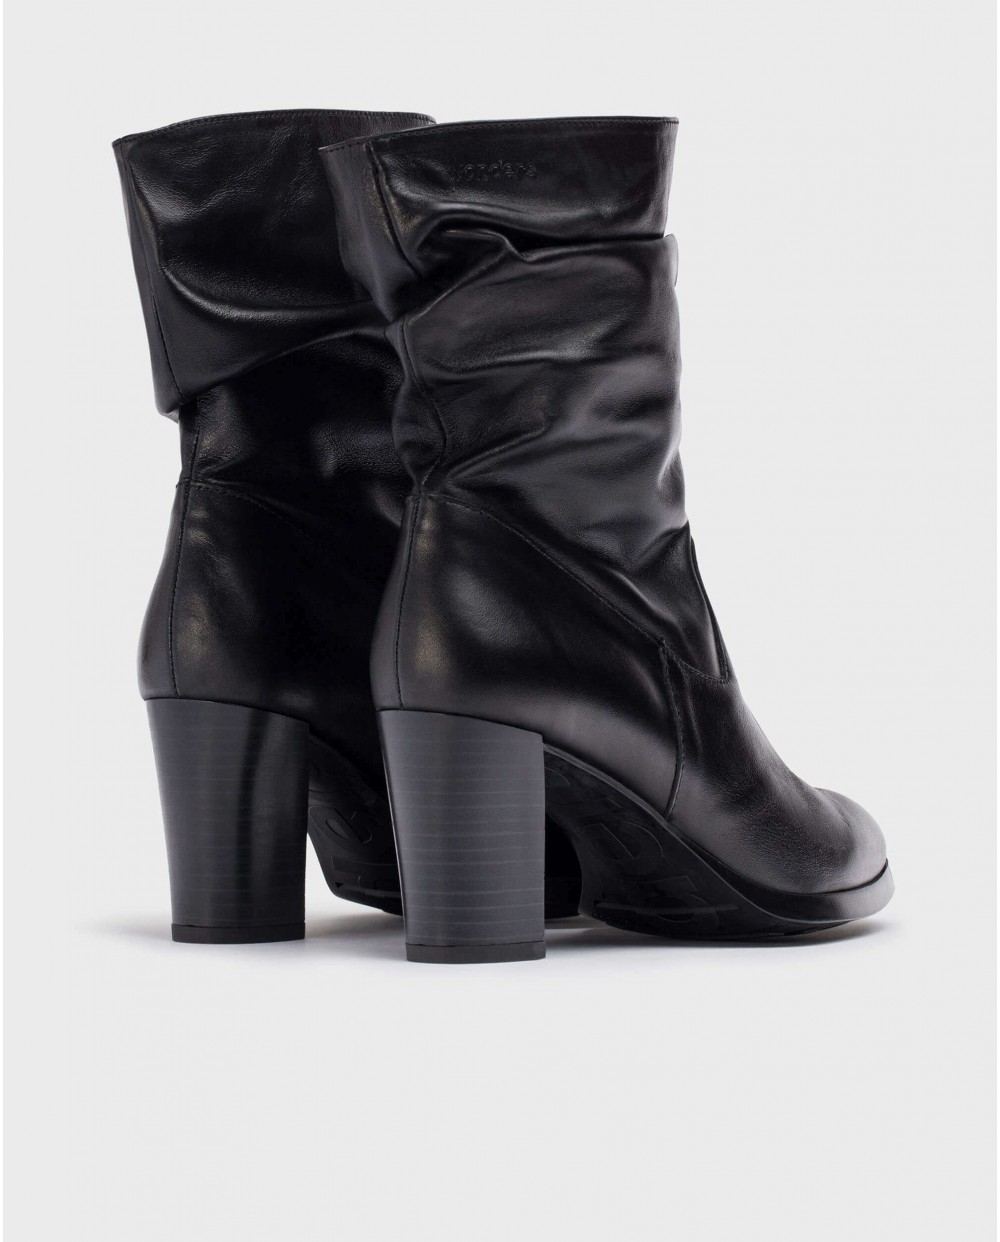 Wonders-Ankle Boots-Black OCADIO ankle boot